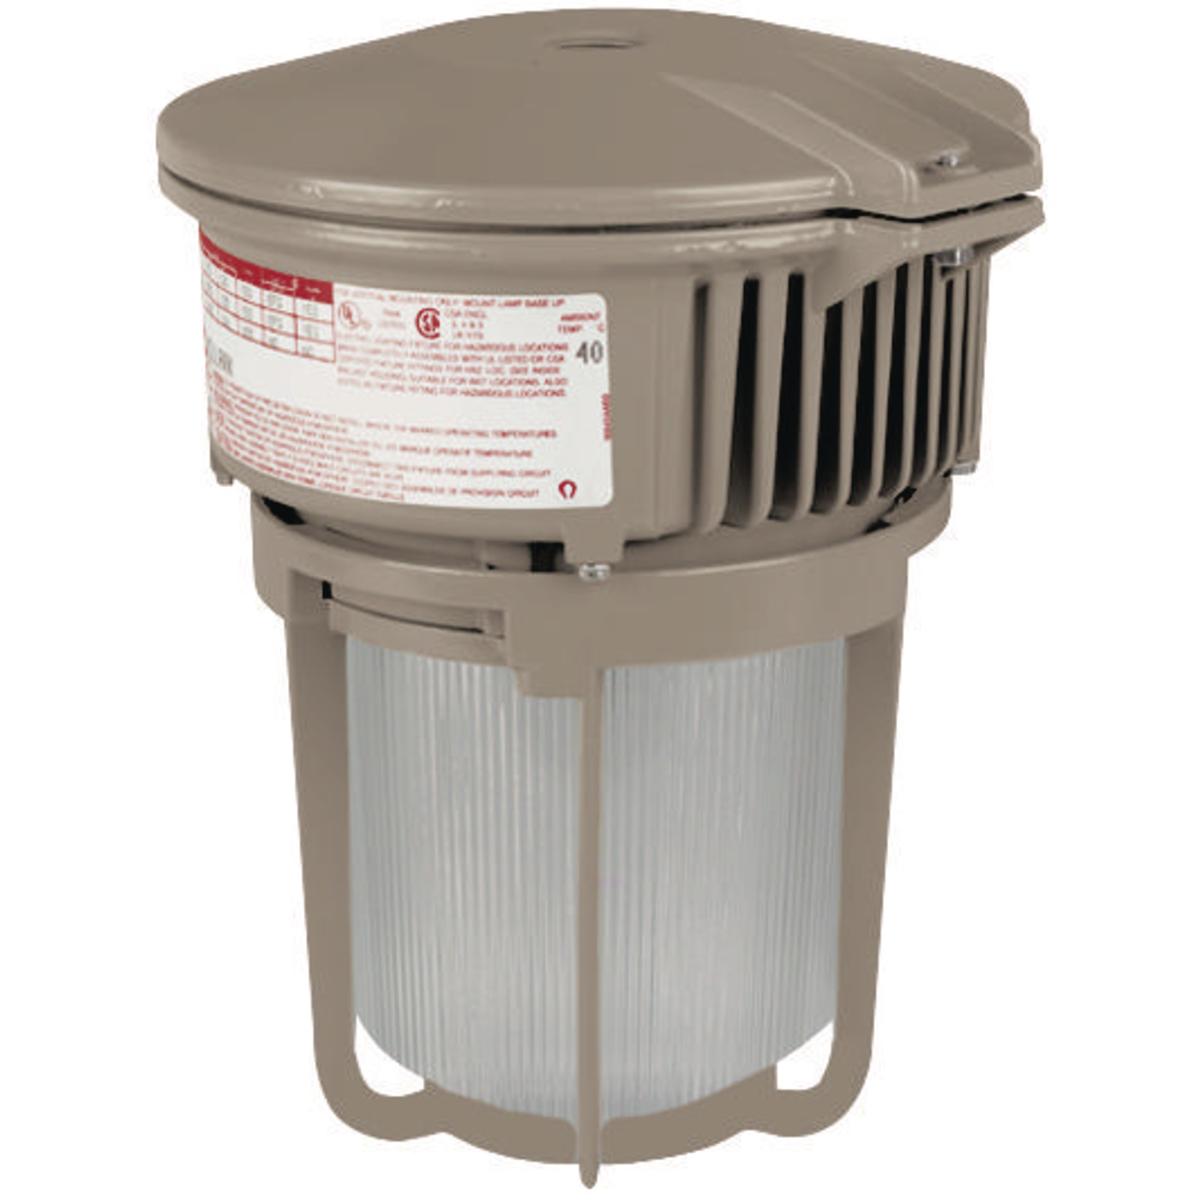 Hubbell MBL2230A2R5G The MBL Series is a compact low bay energy efficient LED. The design of the MBL makes it suitable for harsh and hazardous environments using a cast copper-free aluminum. Its low profile and compact design allow the MBL to fit in areas where larger fixture